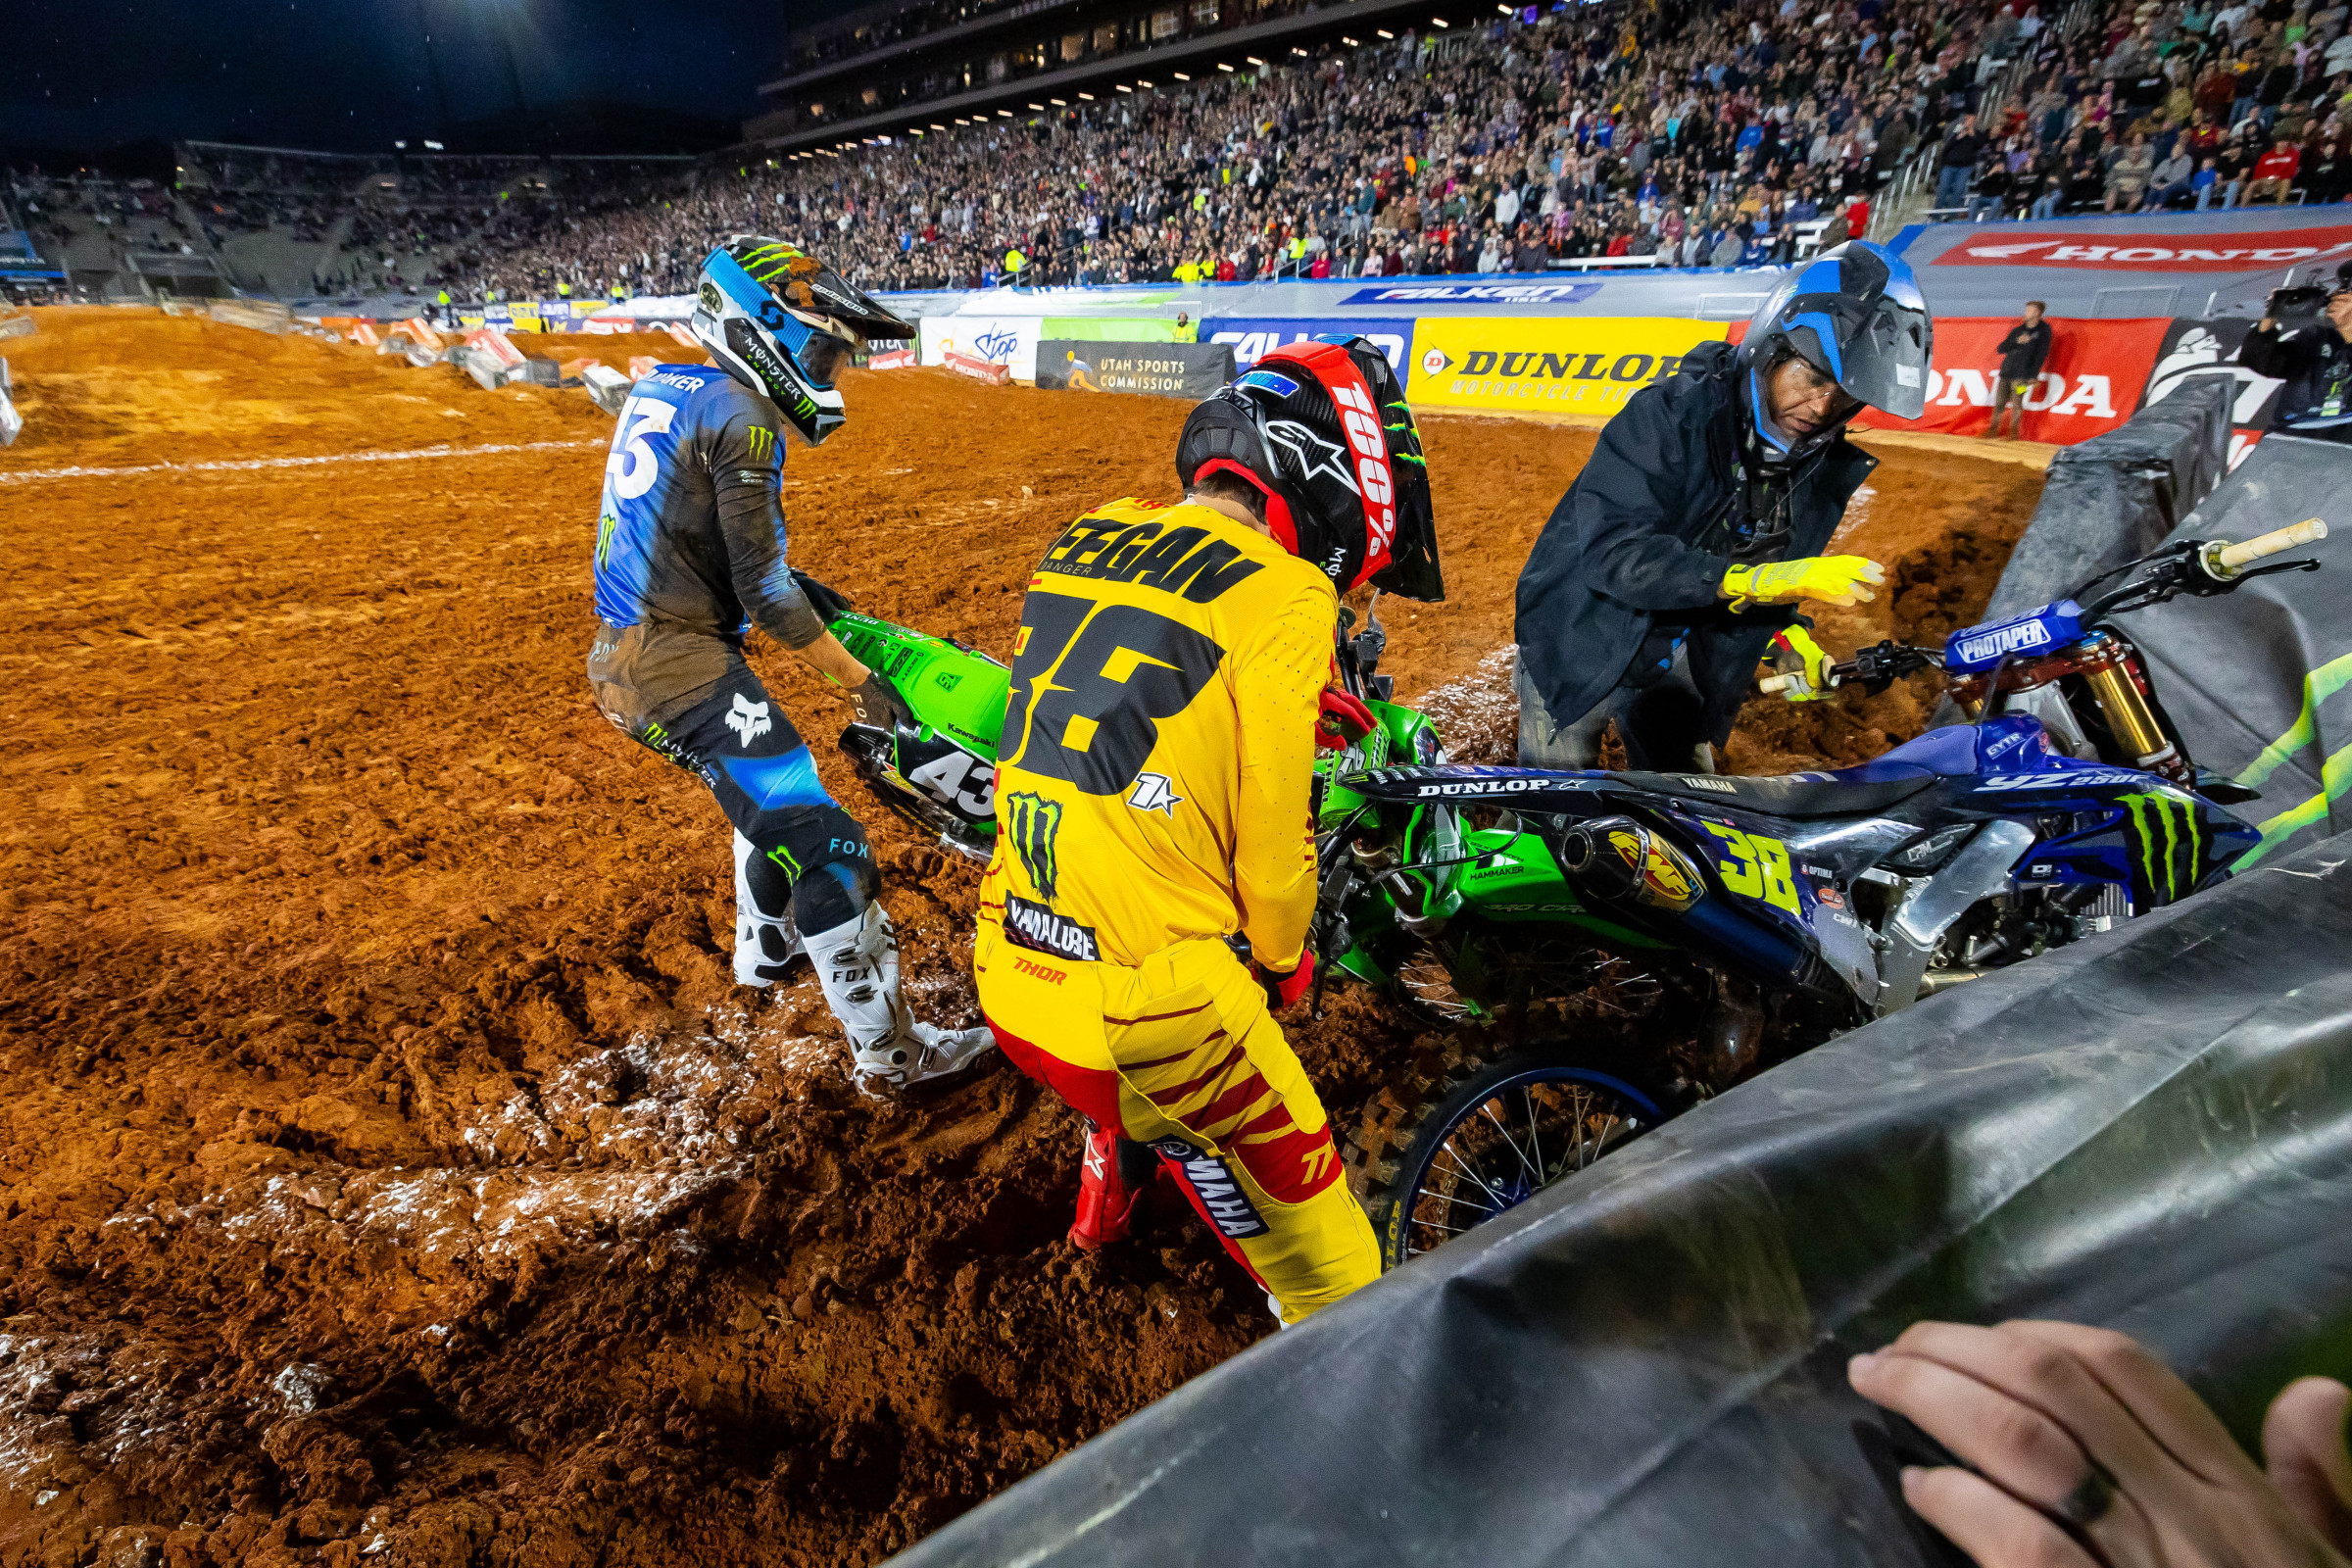 Haiden Deegan Fined for Yelling at Hammaker, Going to Kawasaki Pit After Heat Race